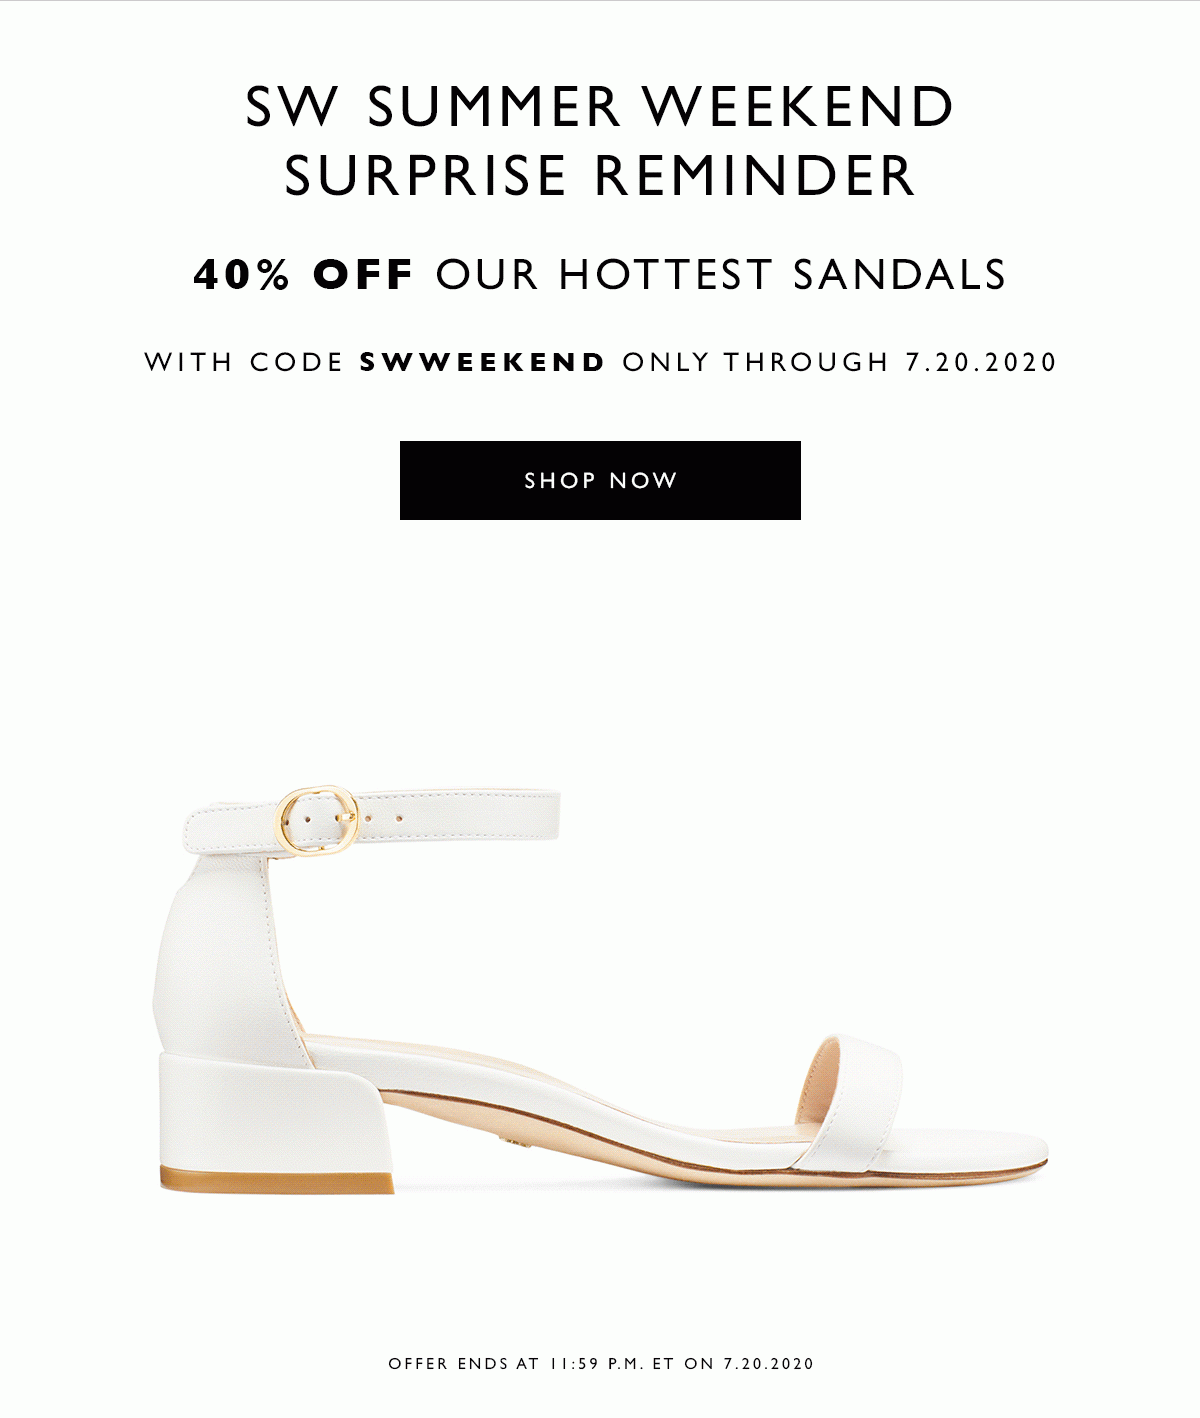 SW Summer Weekend Surprise Reminder 40% off our hottest sandals. With code SWWEEKEND only through 7.20.2020. SHOP NOW. Offer ends at 11:59 P.M. ET on 7.20.2020